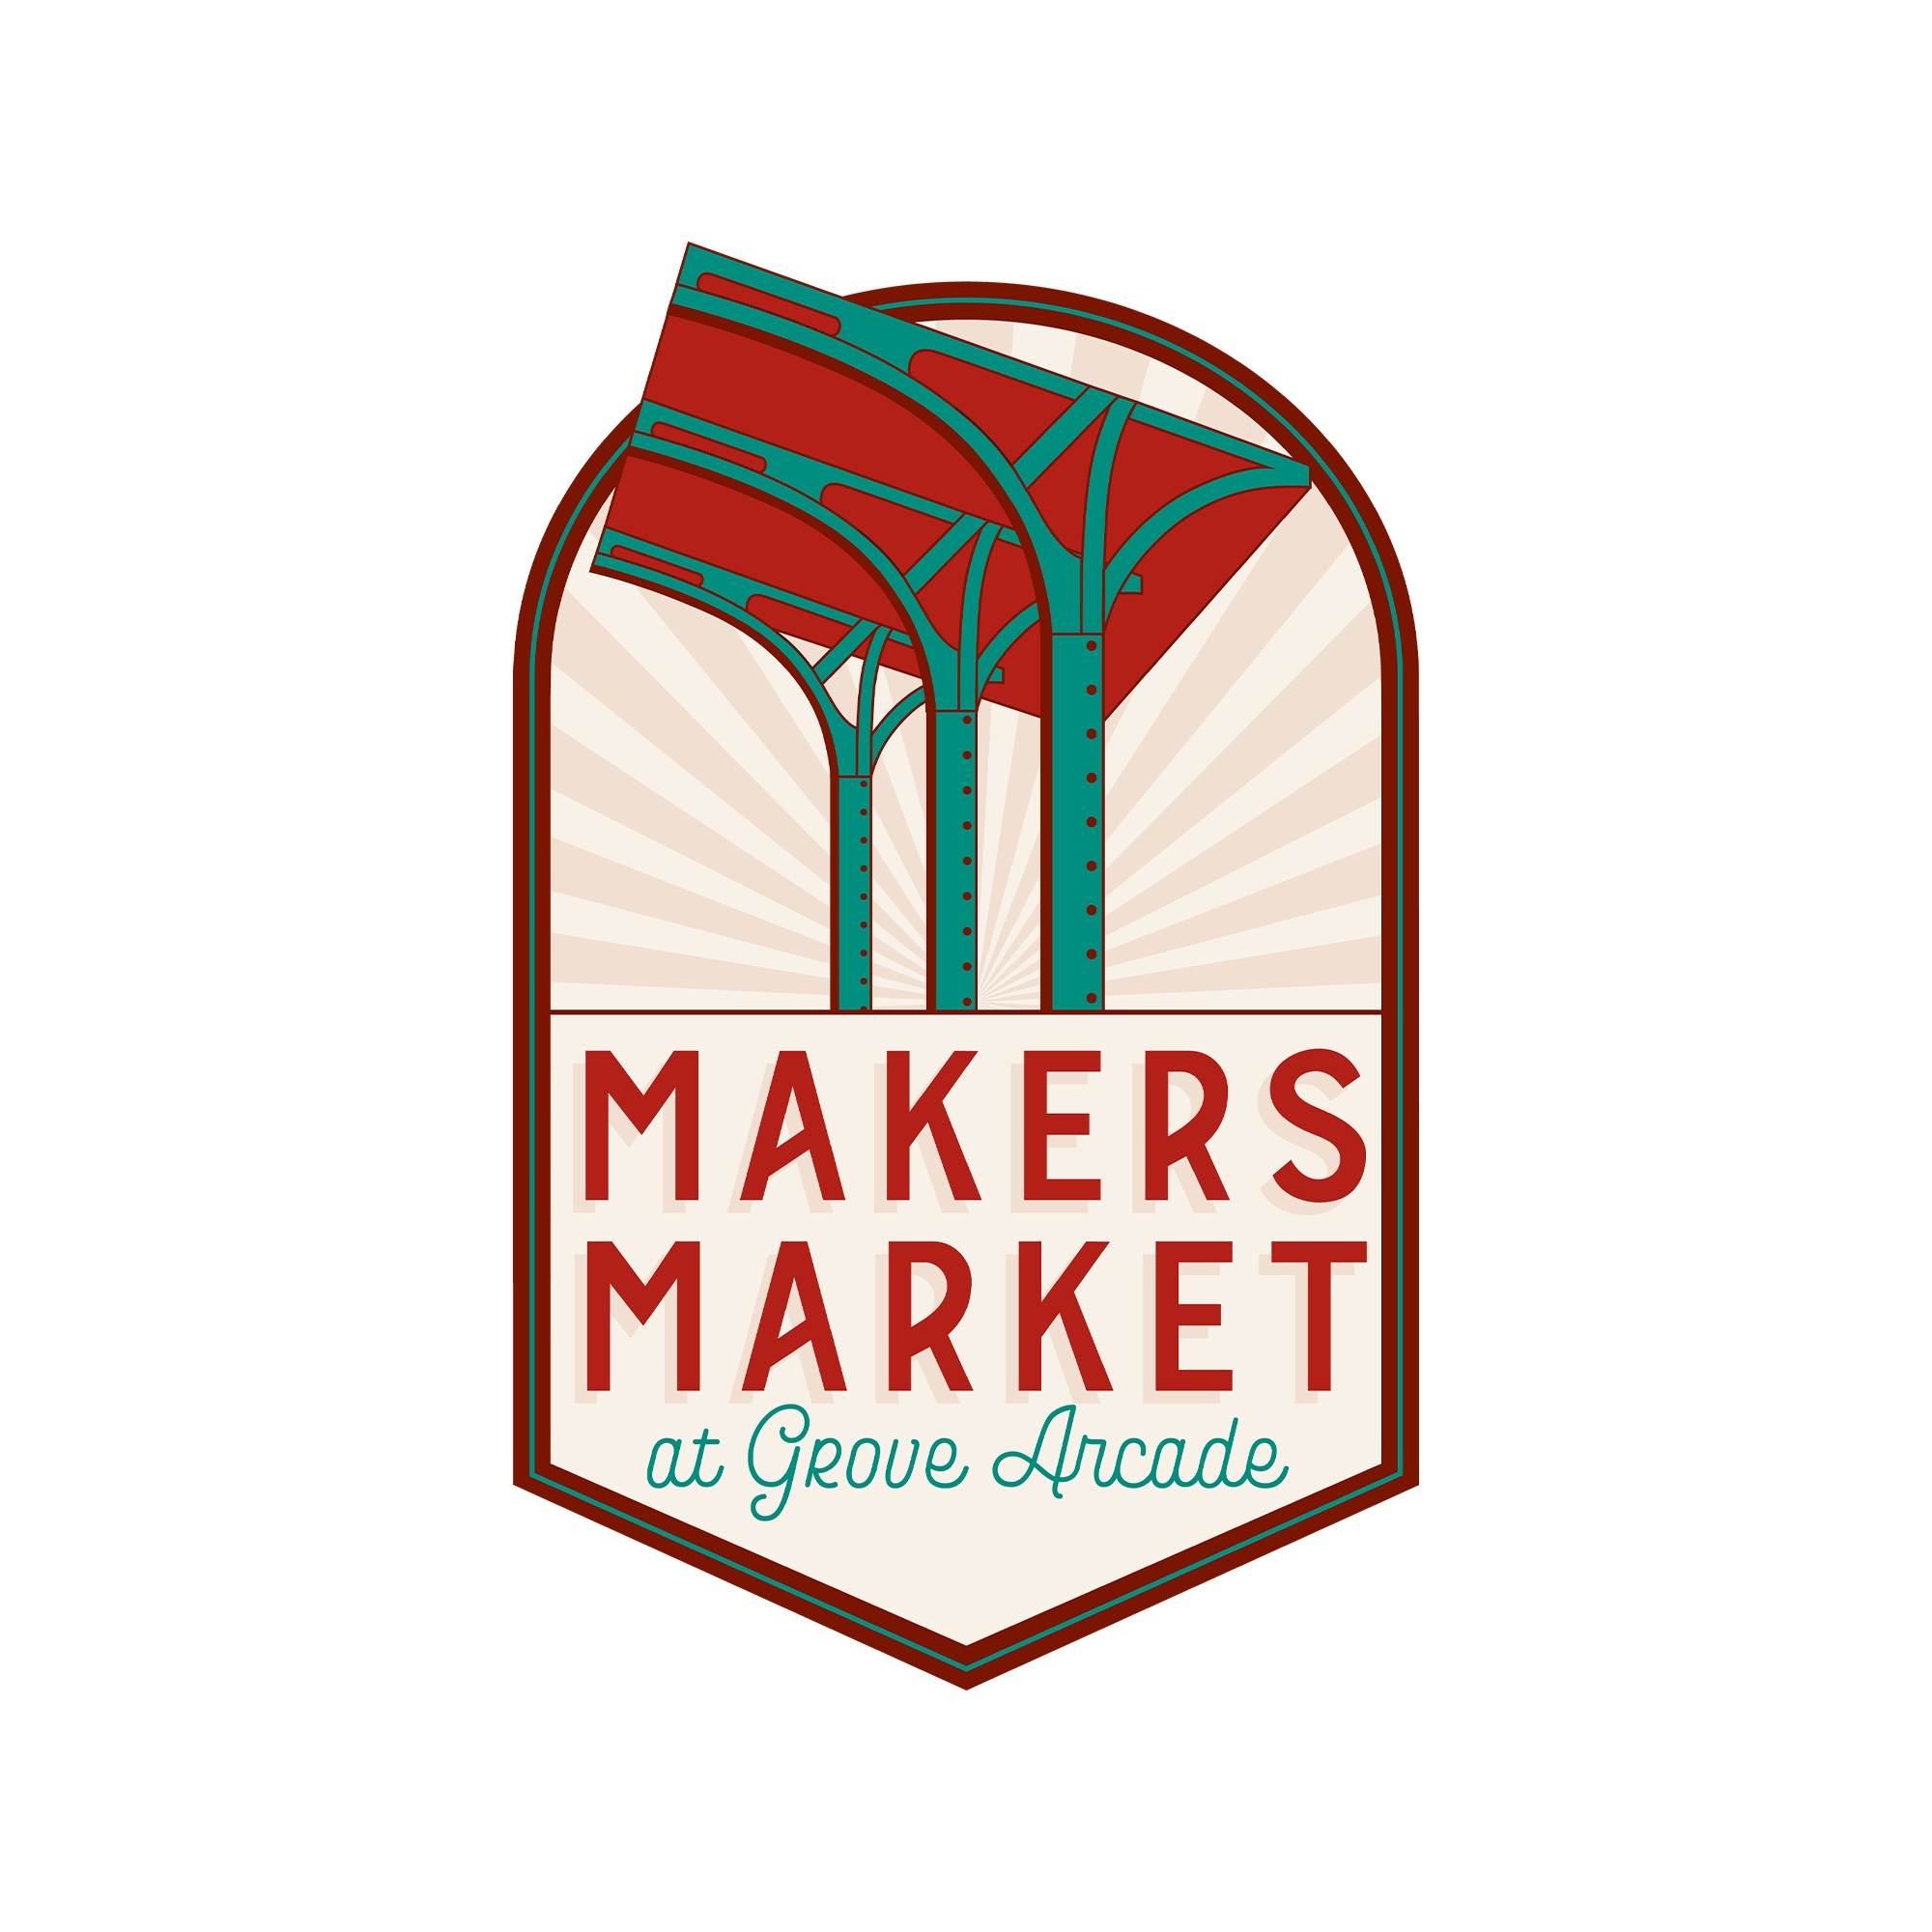 a red and green illustrated logo for the makers market